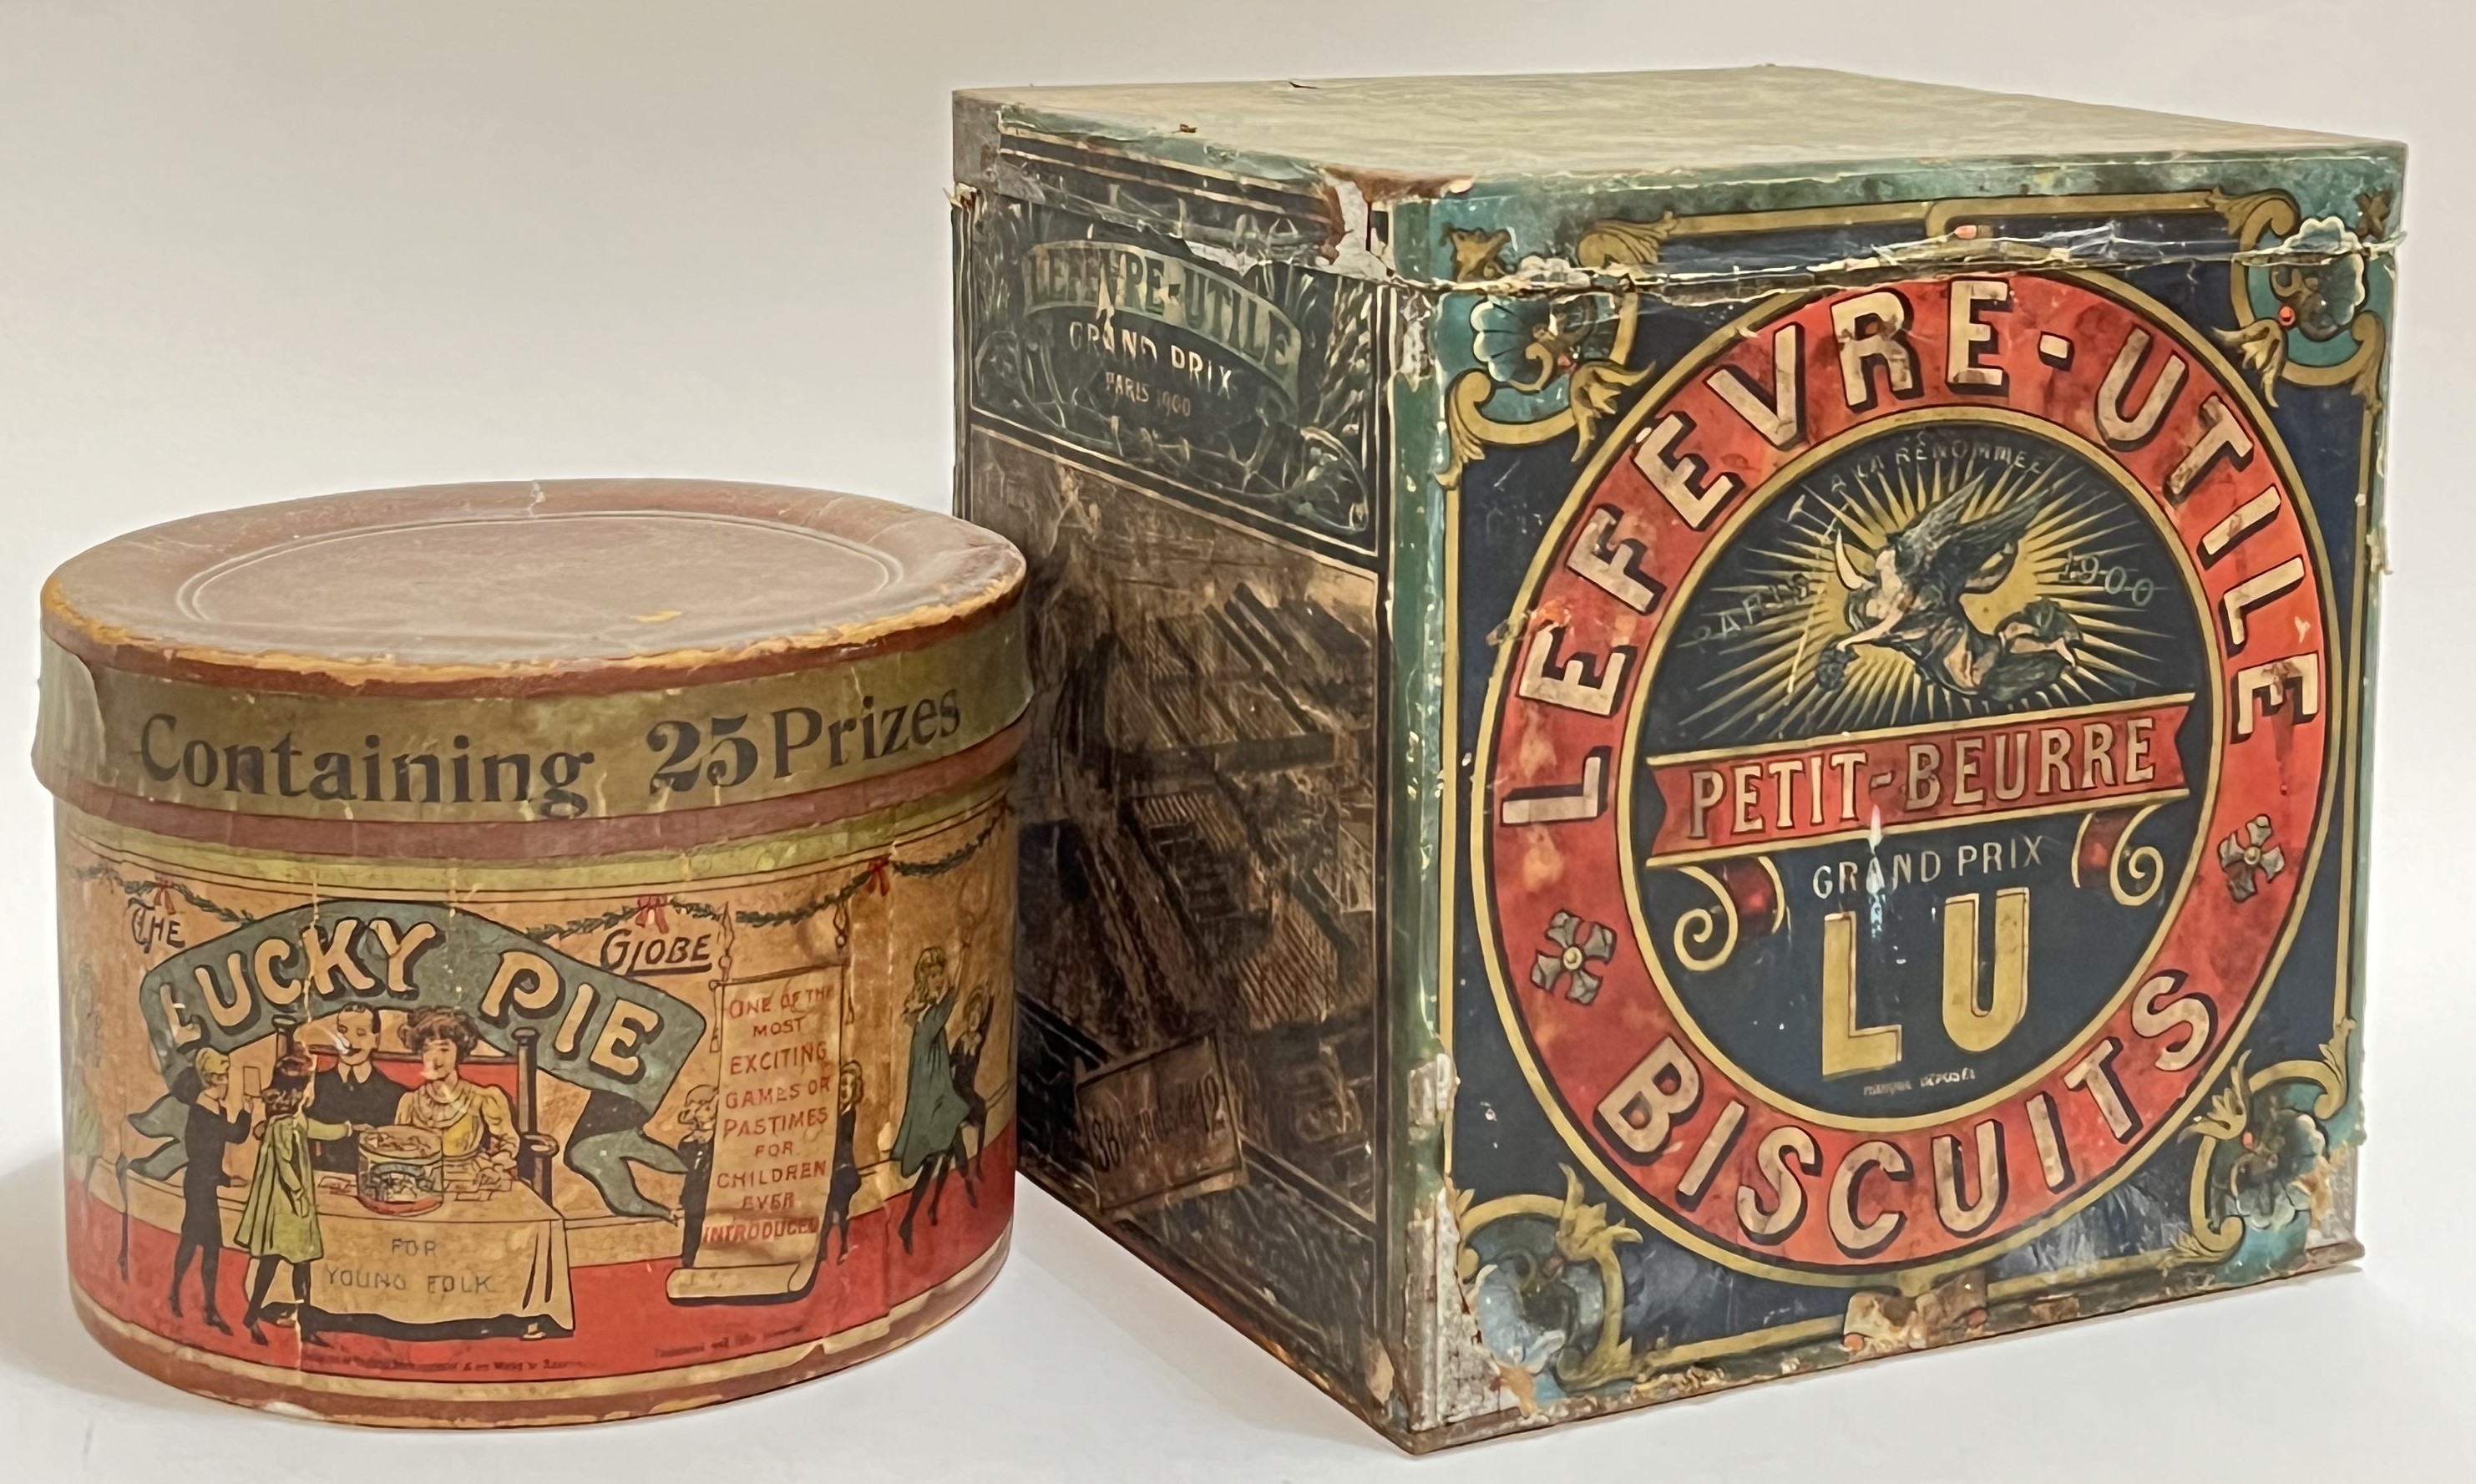 A large French Lefevre-Utile Lu Biscuits confectionary tin together with a card children's past-time